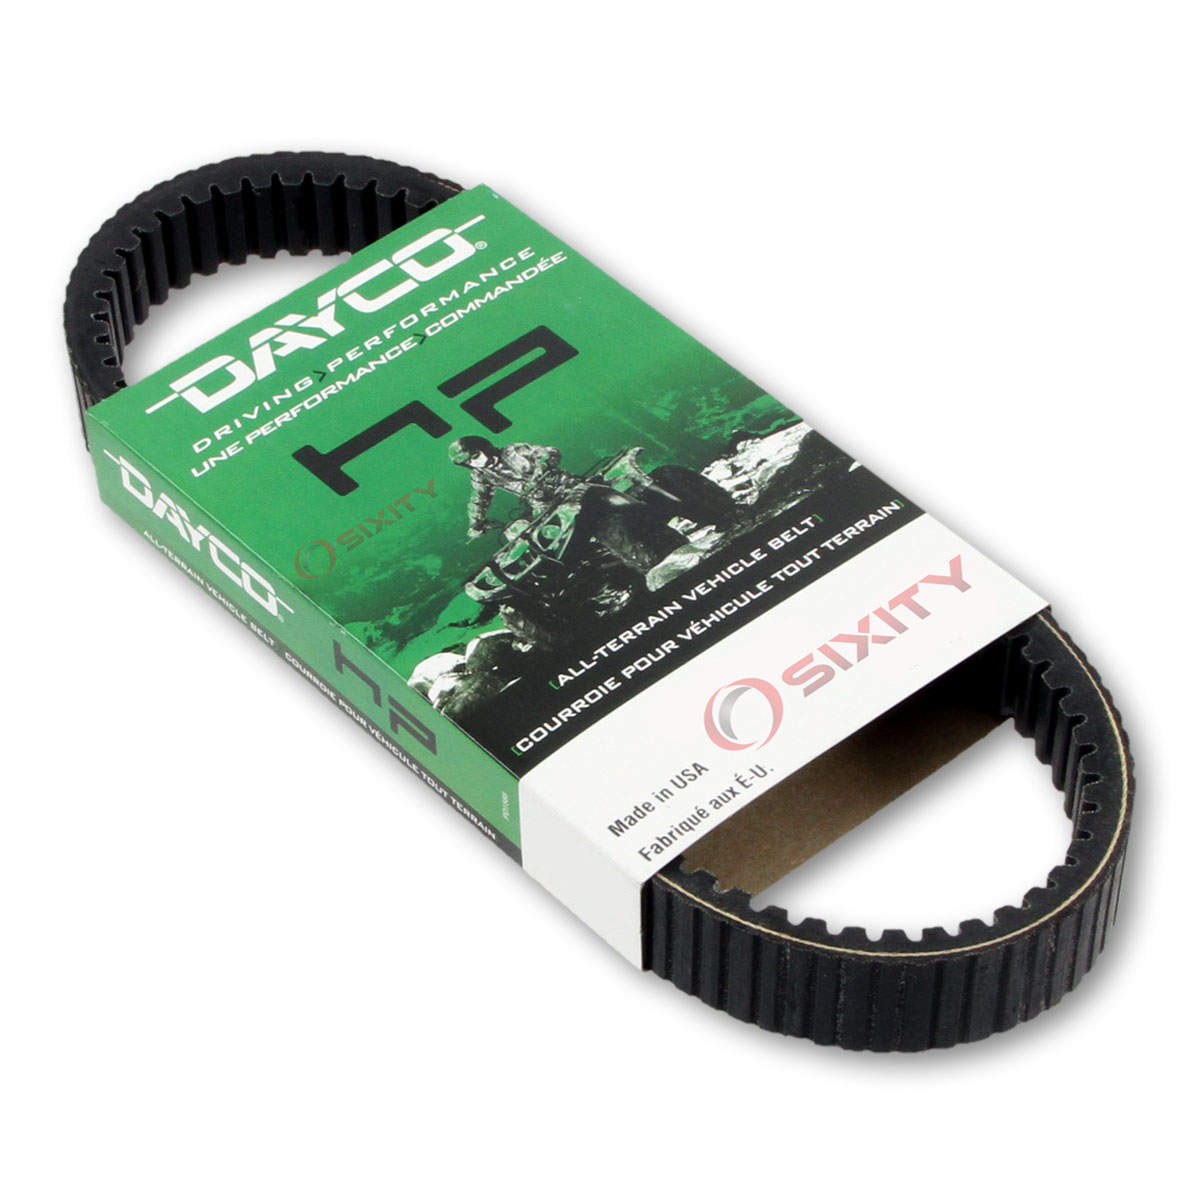 Dayco HP Drive Belt for 2008 Arctic Cat 500 4x4 Auto M4 - High Performance